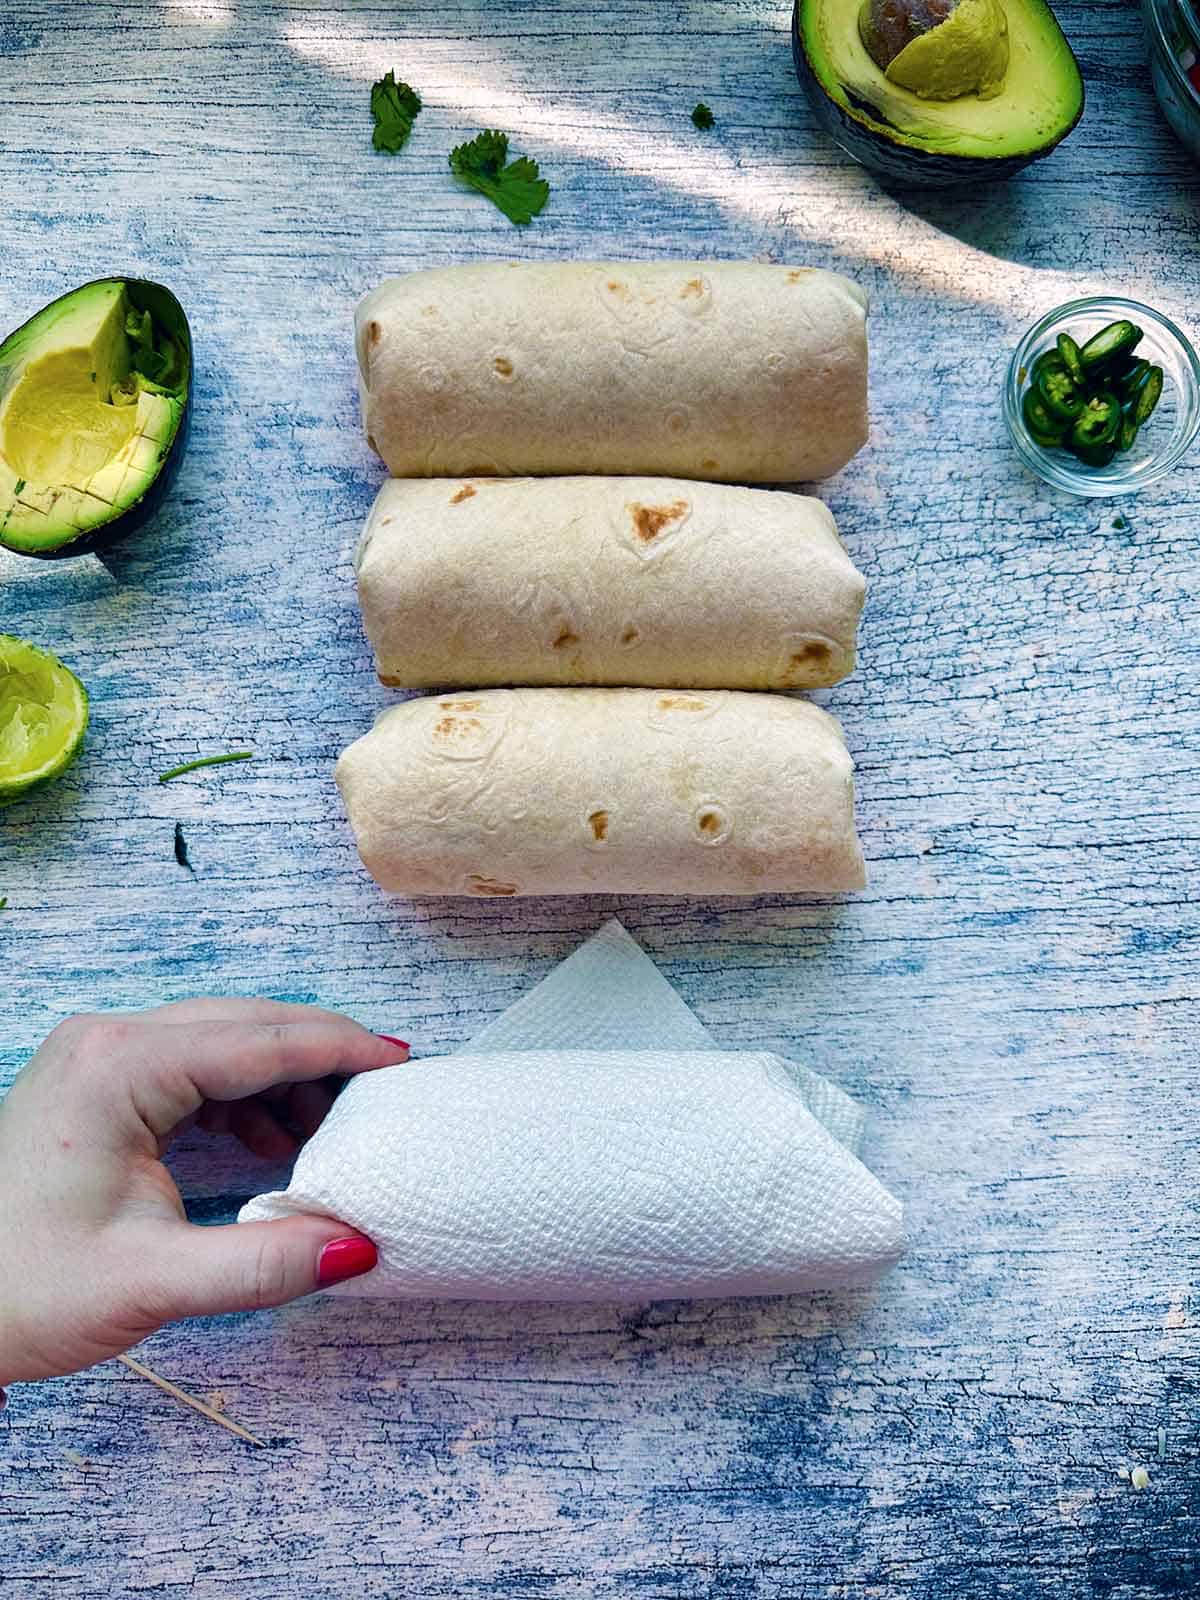 Make ahead burritos being wrapped in a paper towel to prepare for freezing and microwaving.